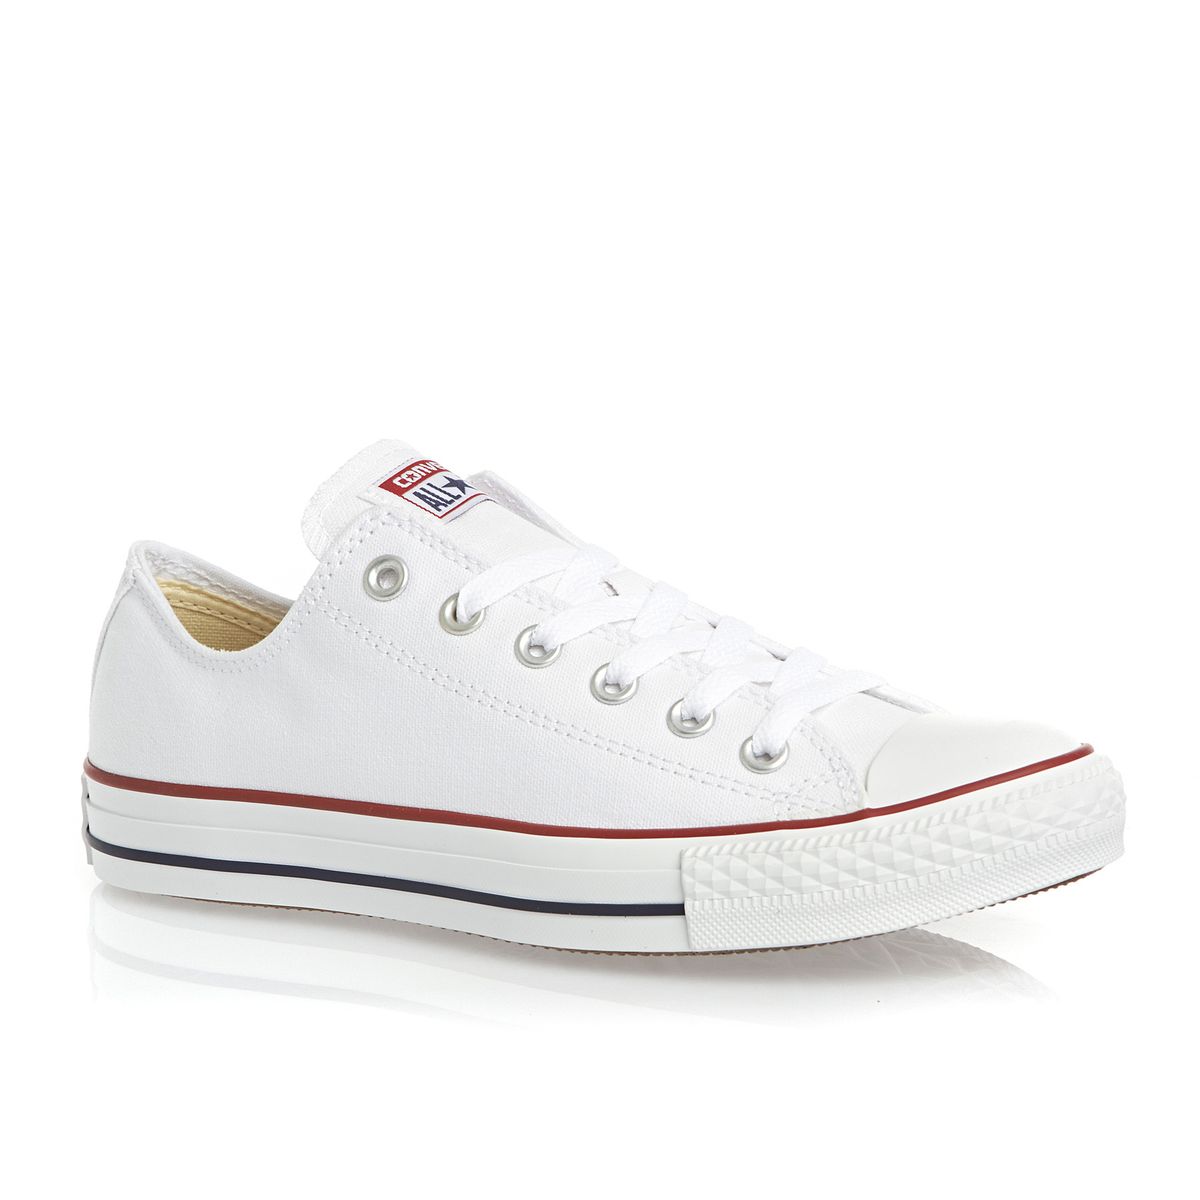 converse all star grises bajas